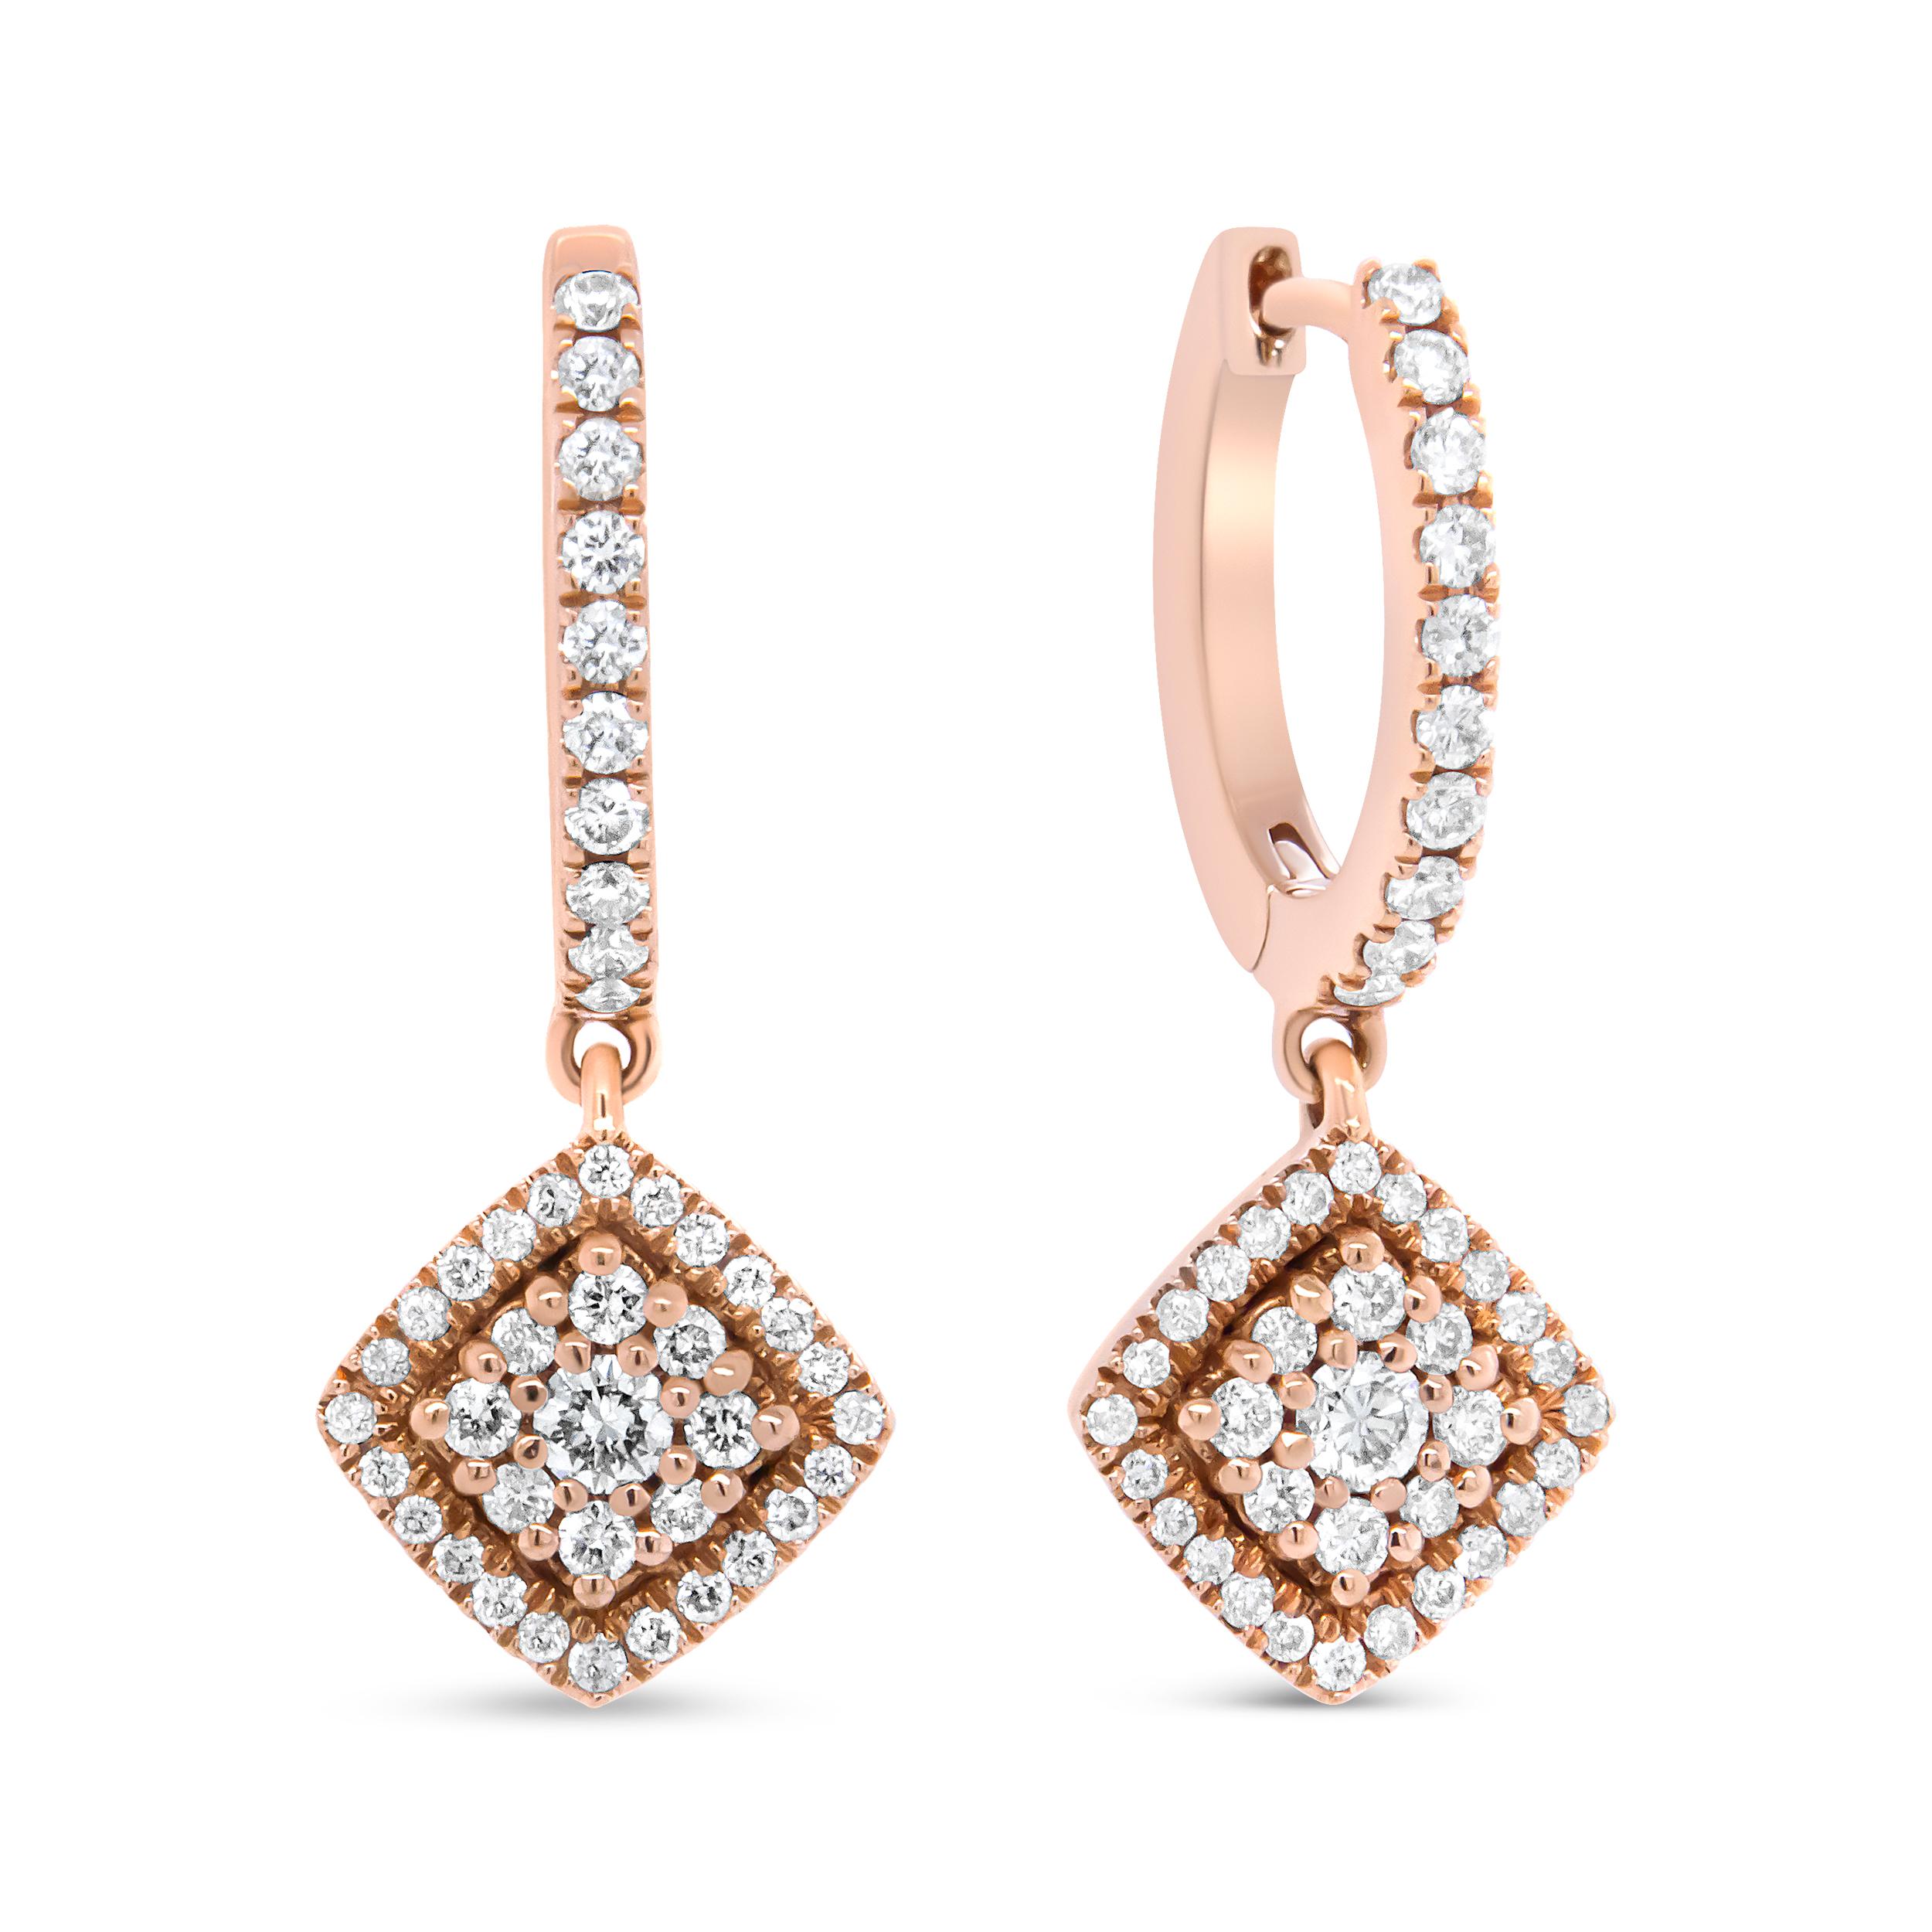 Scintillating diamonds steal the show in this shimmering pair of dangle earrings made from genuine 18k rose gold, a metal that will stay tarnish-free for years to come. Each earring showcases an upper dangle lined with diamonds, and a lower dangle